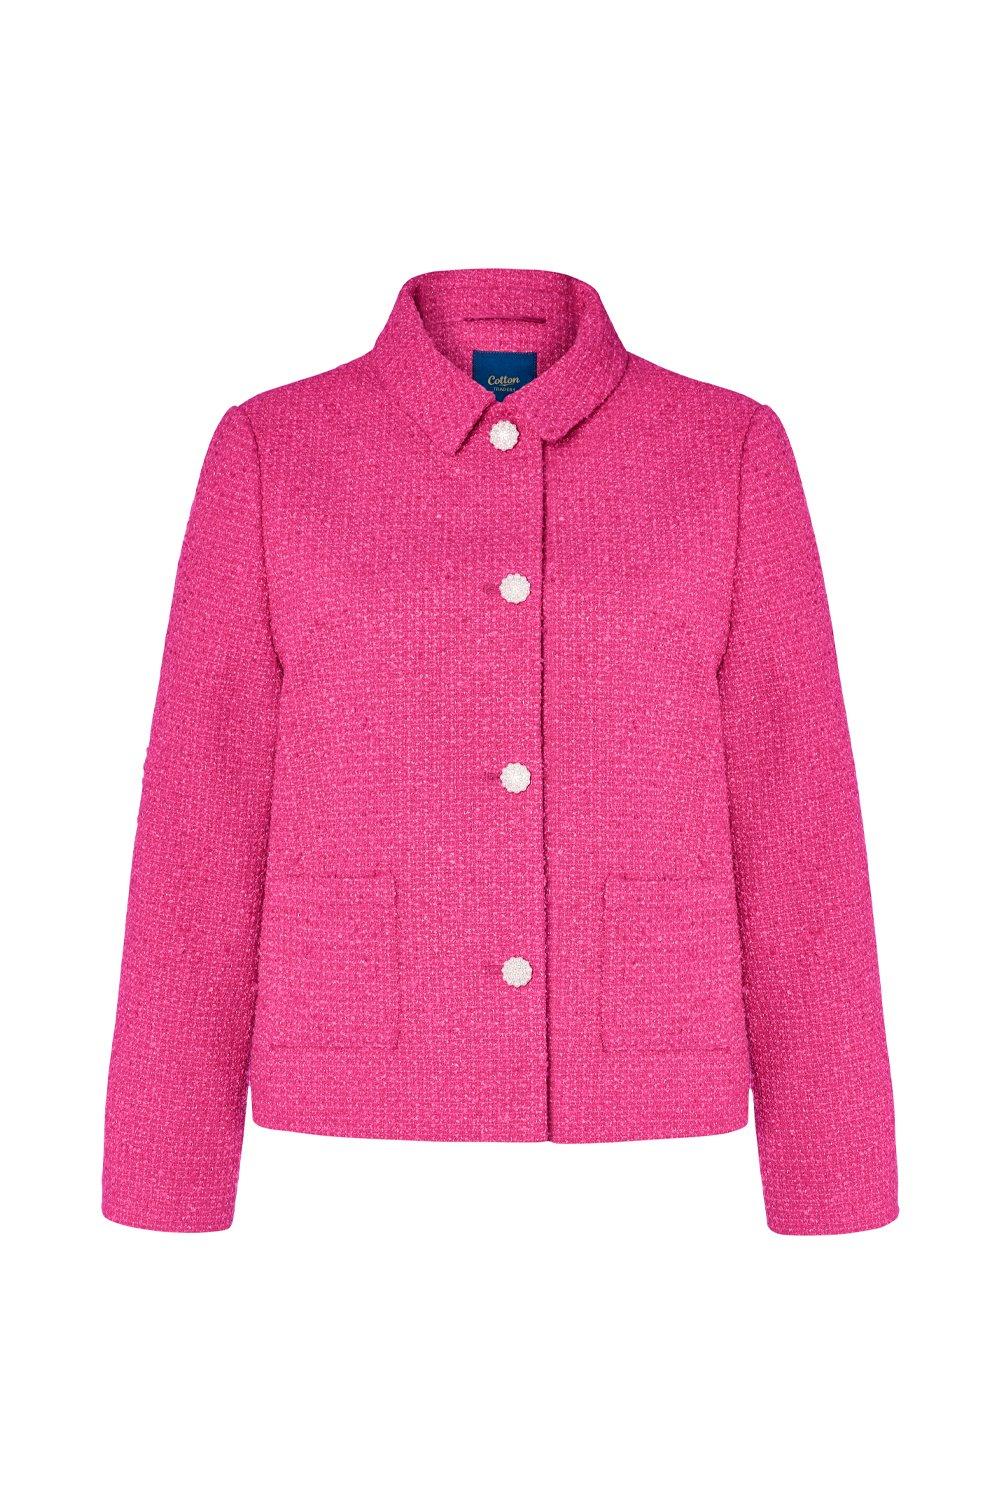 Boucle Jacket by Cotton Traders